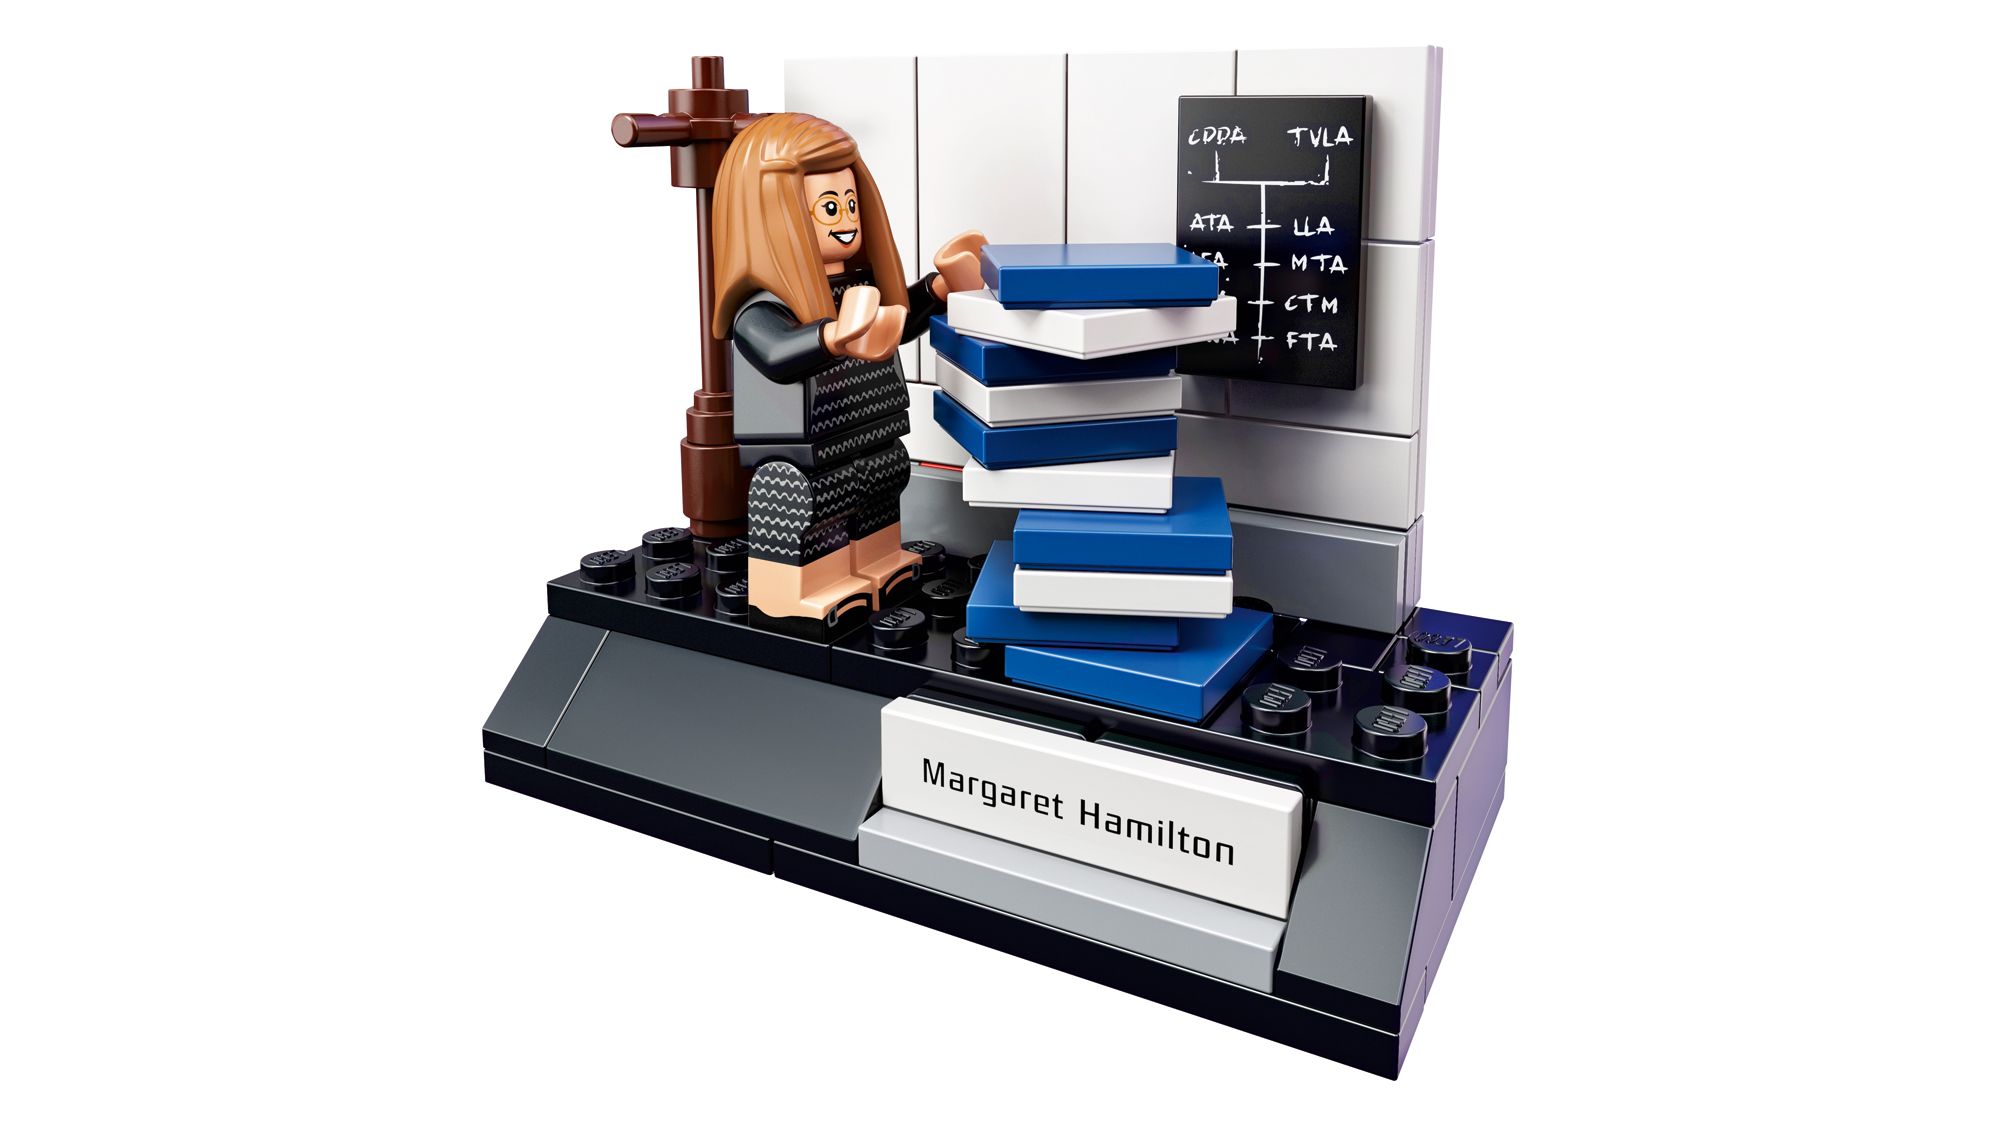 The Lego figurine of Margaret Hamilton, whose work helped put the first people on the moon.